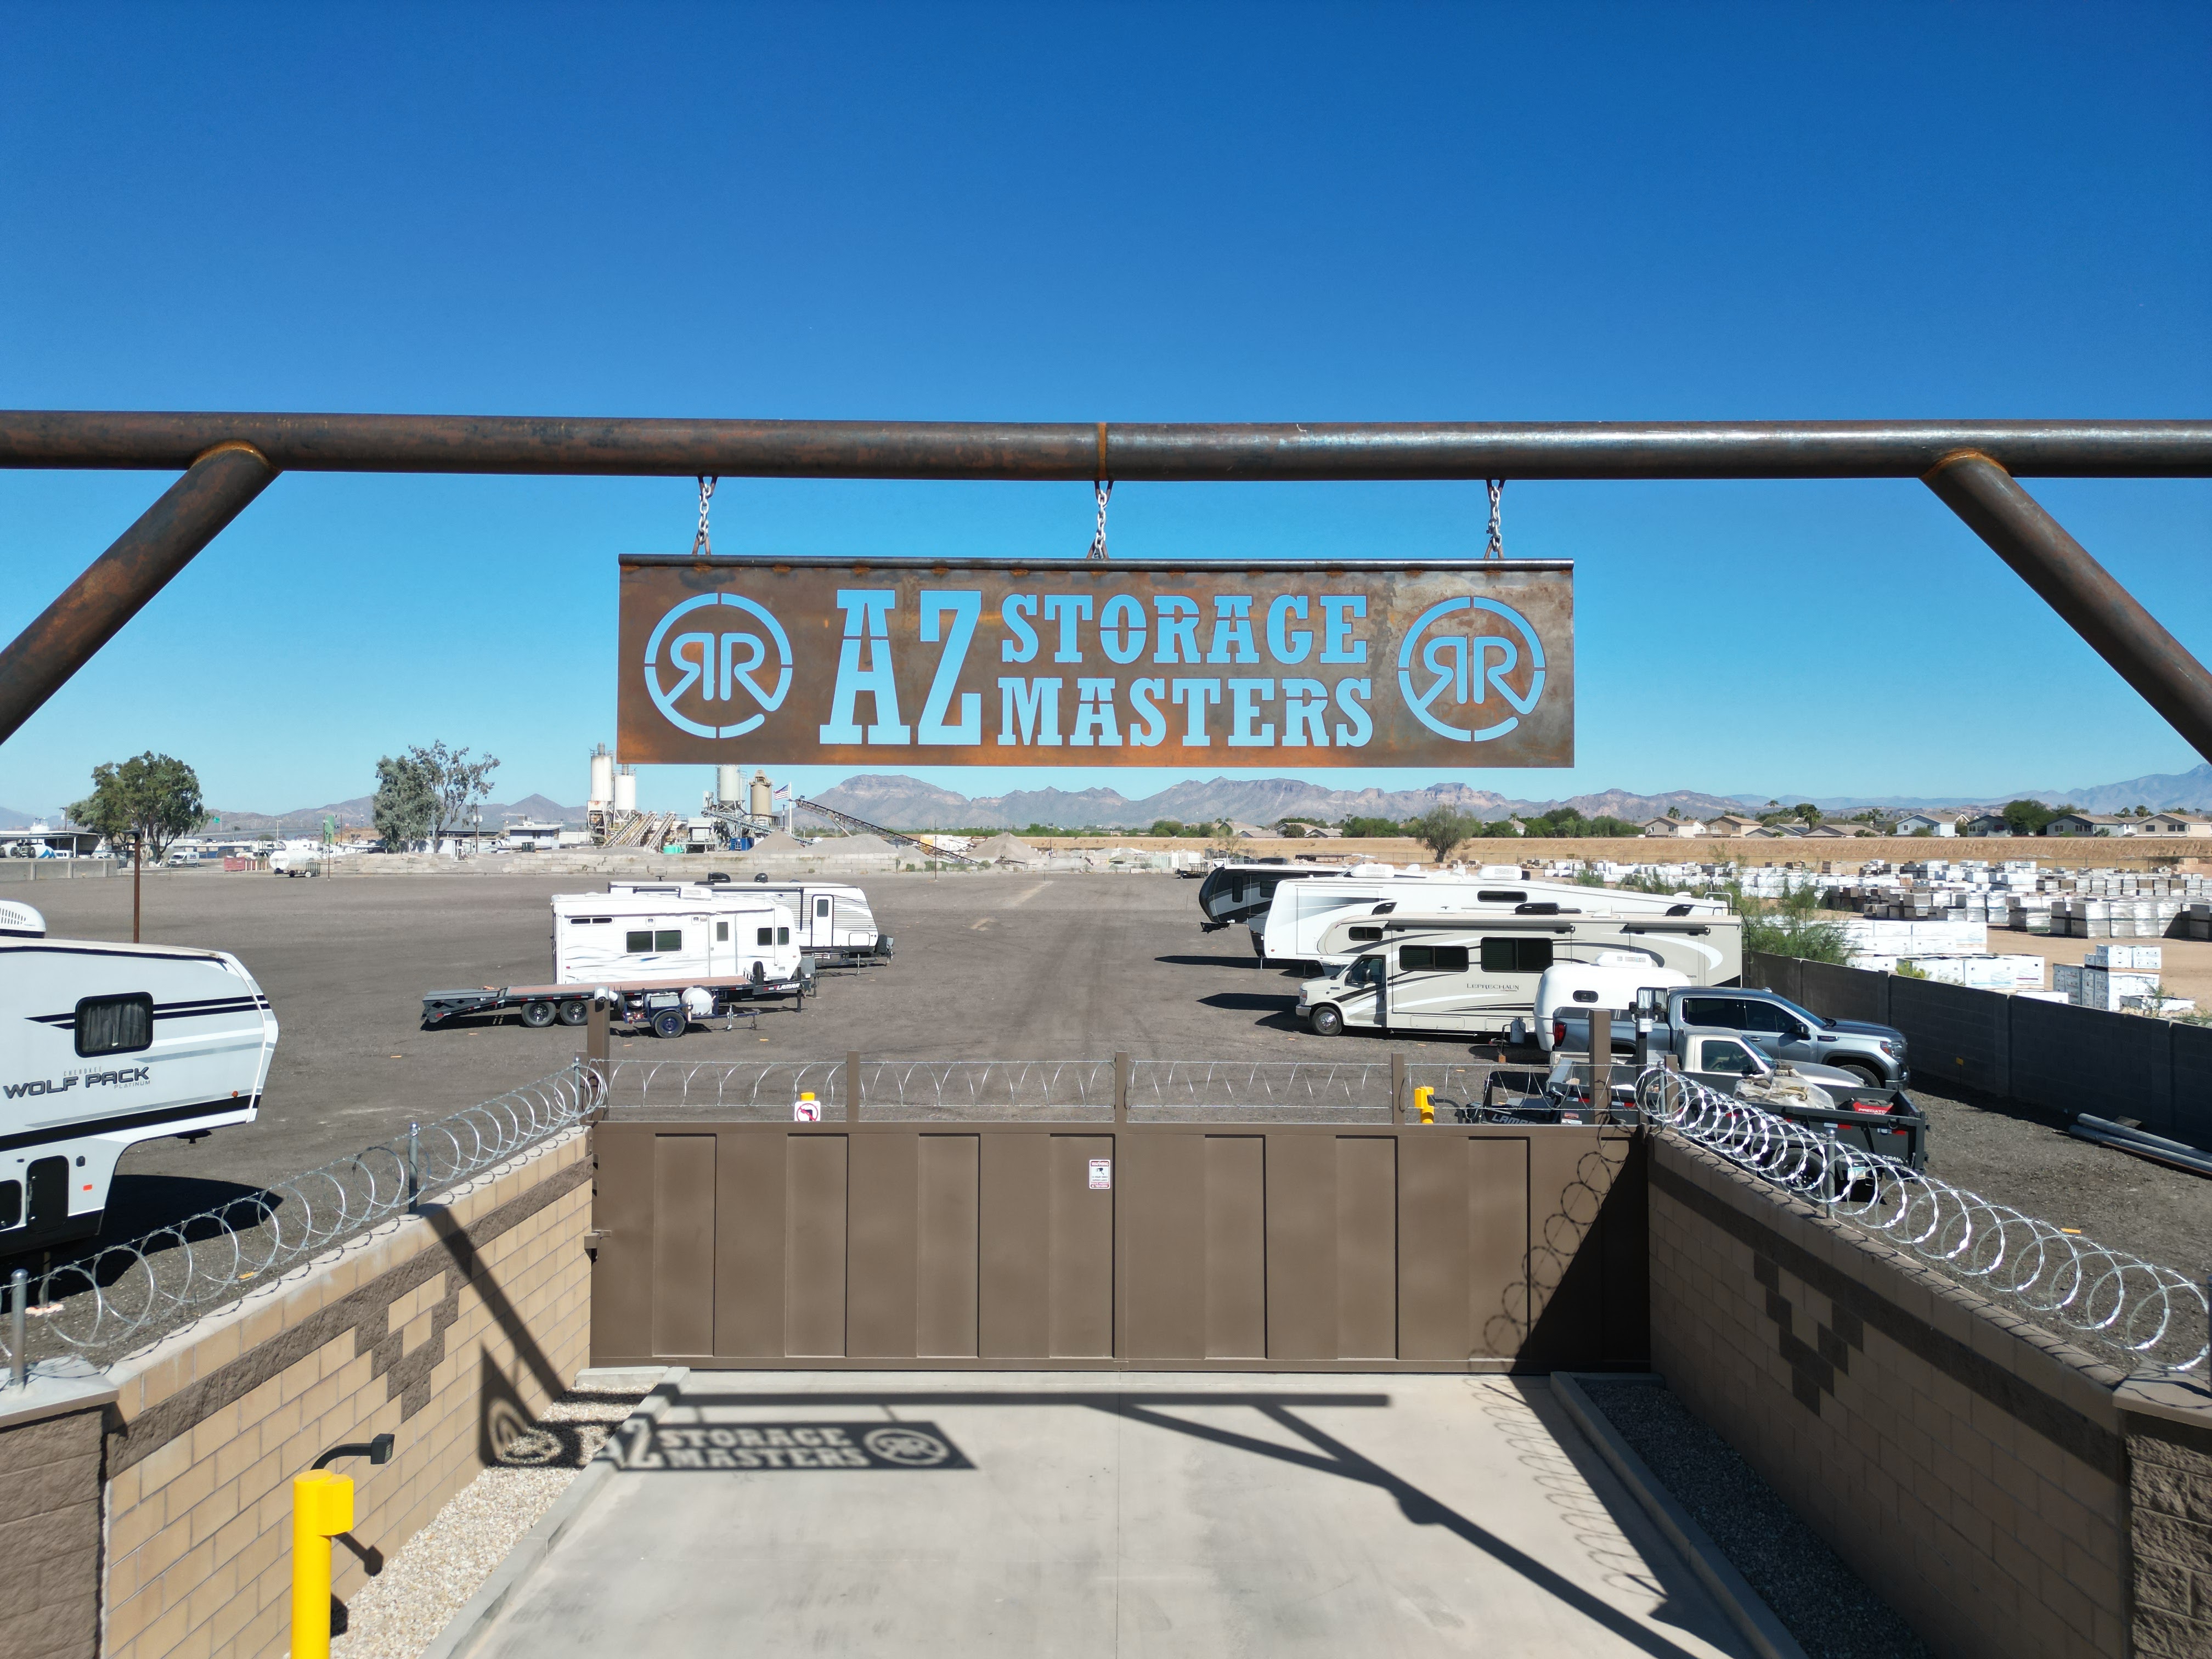 Arizona Storage Masters - Secure Storage Units and Outdoor RV/Boat/Vehicle Parking in Apache Junction, AZ